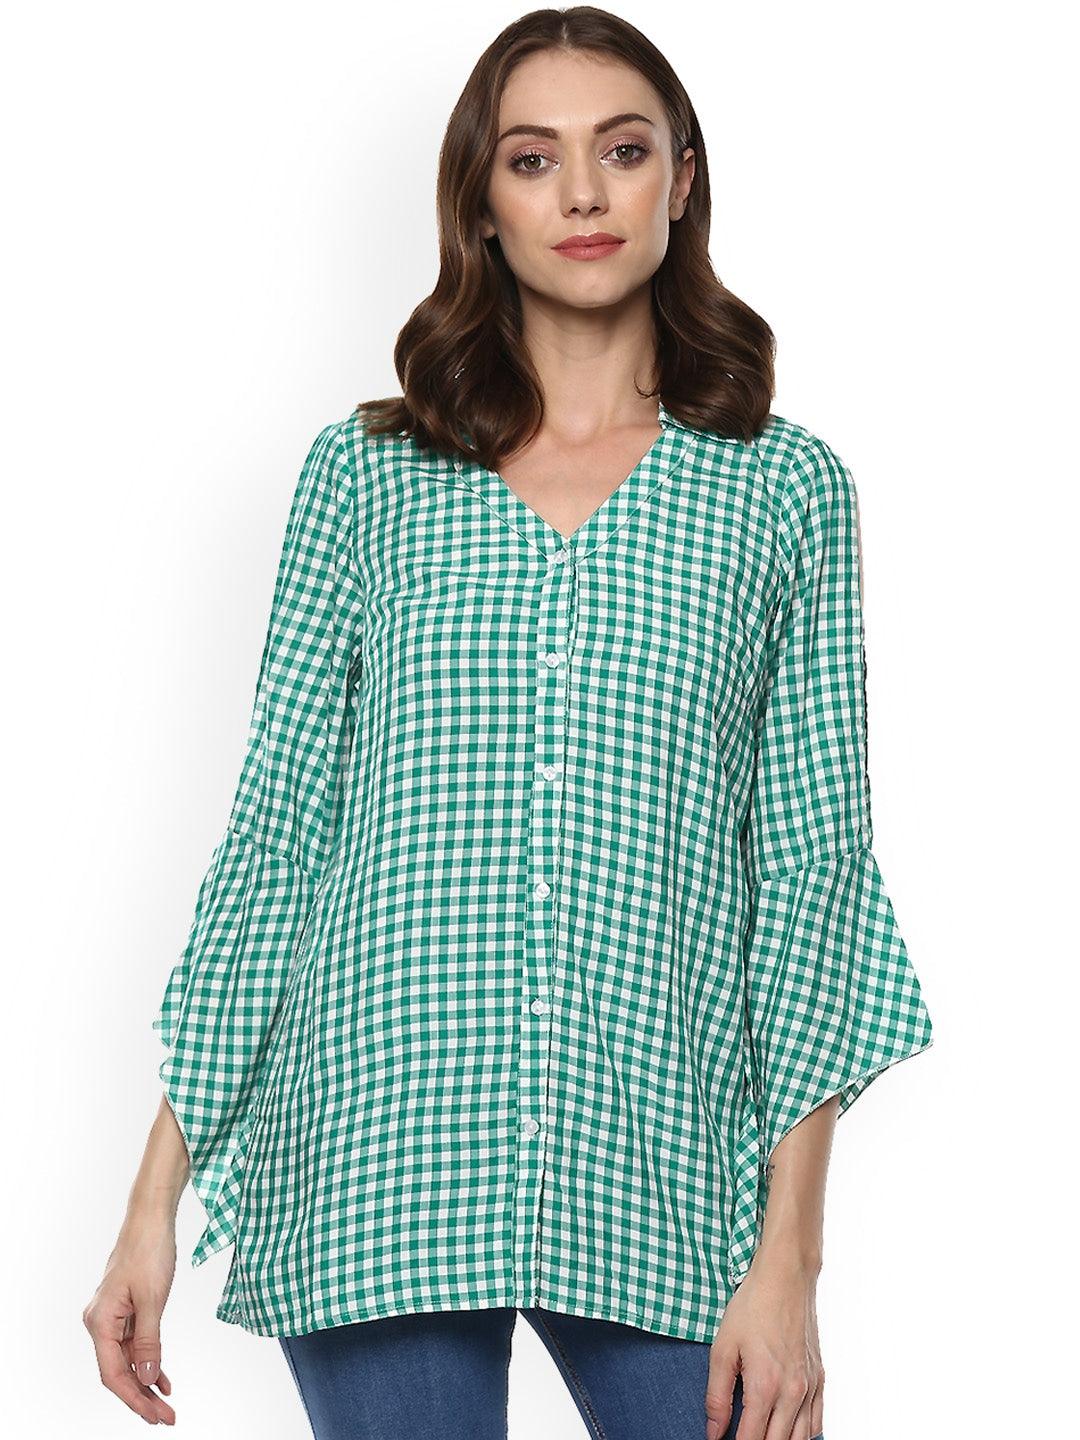 Qurvii Green Gingham Top With Ruffle Sleeves - Qurvii India